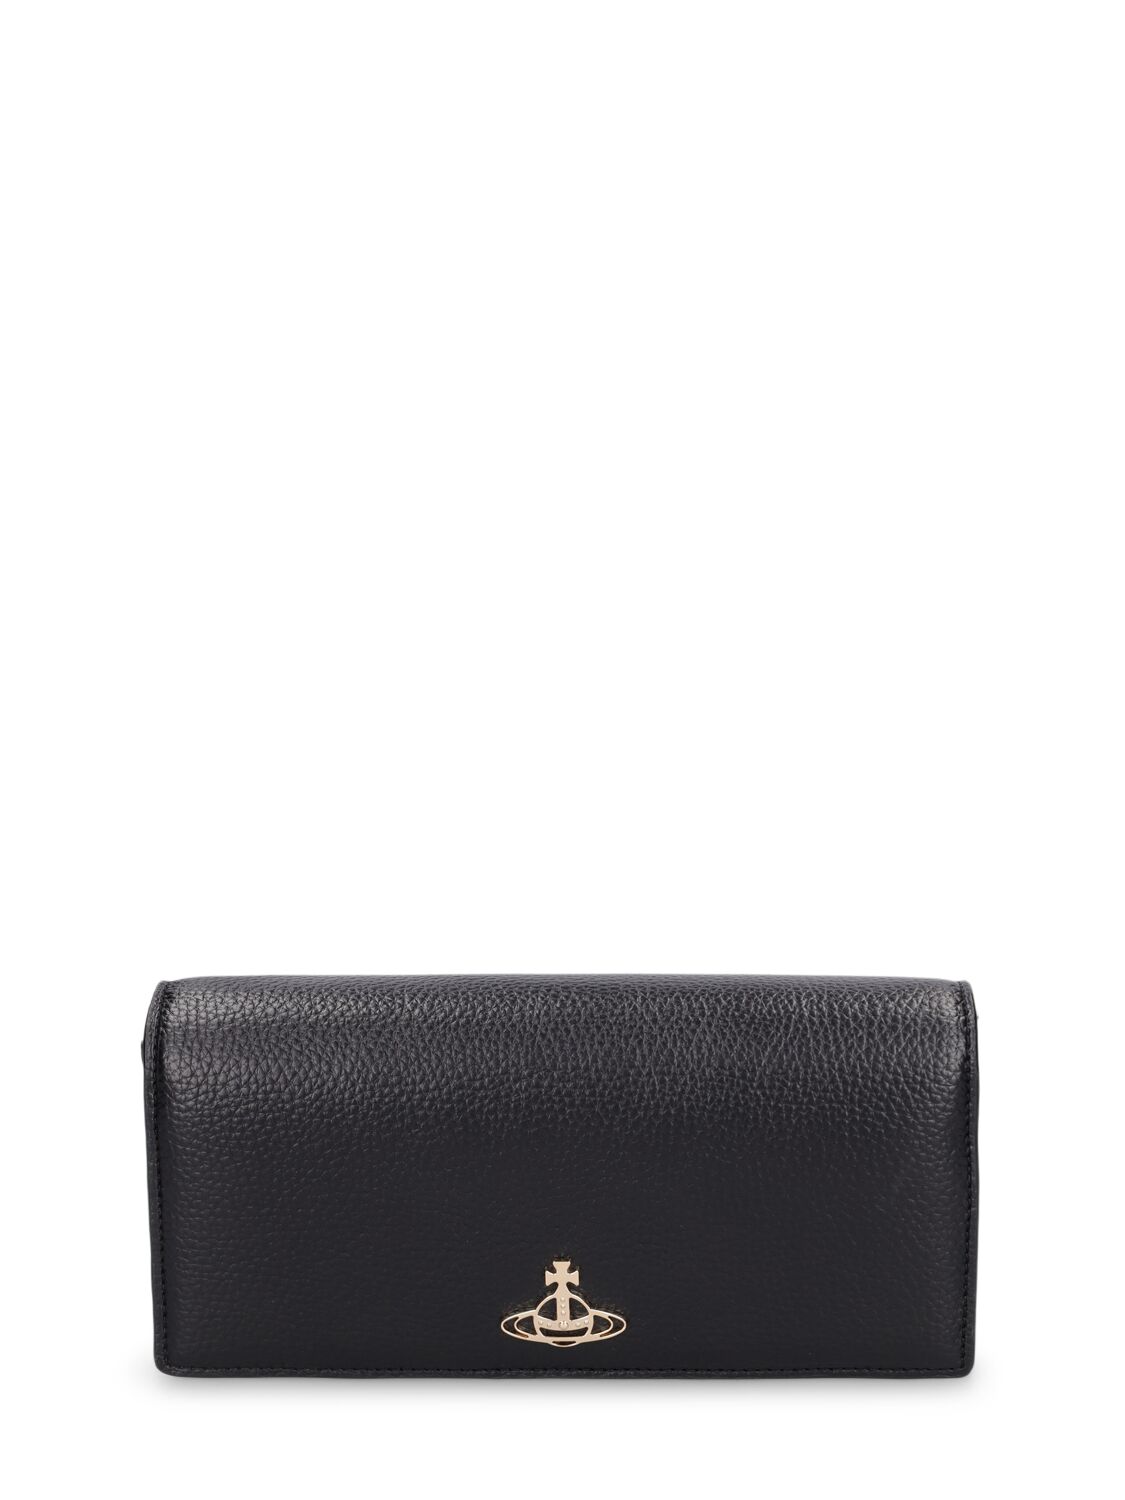 Vivienne Westwood Faux Leather Wallet On Chain In Black,gold